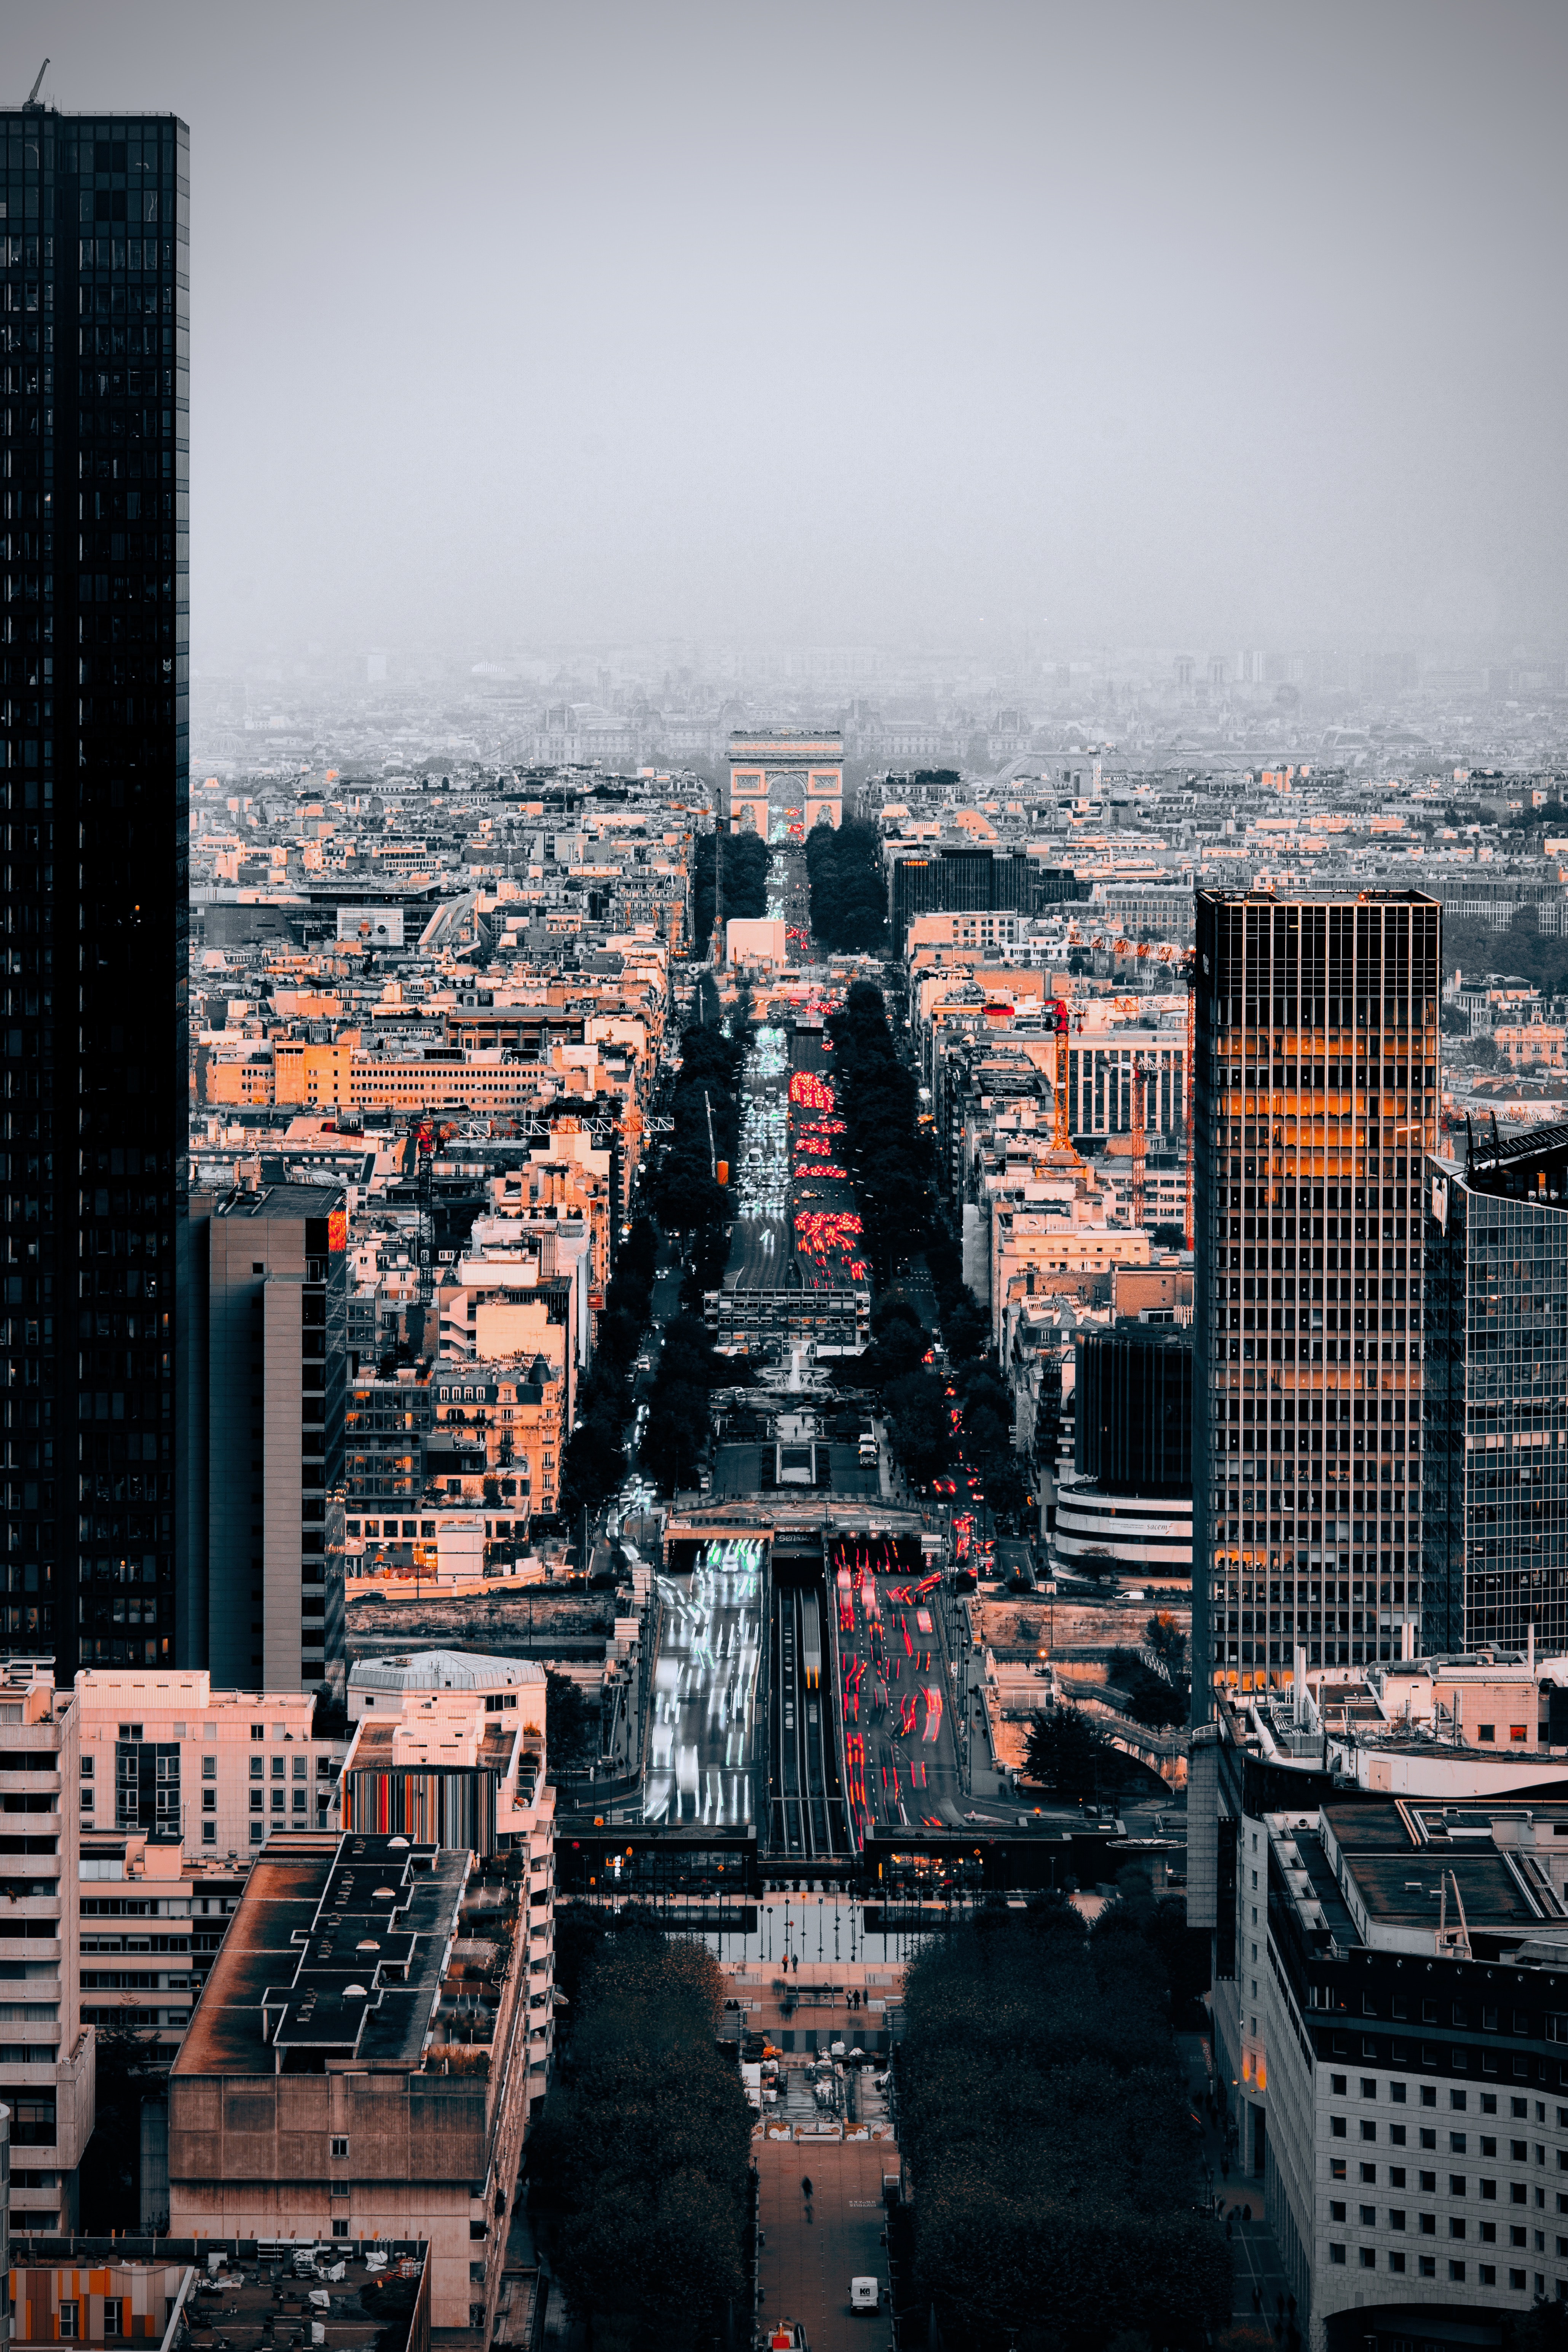 android paris, cities, architecture, city, building, view from above, france